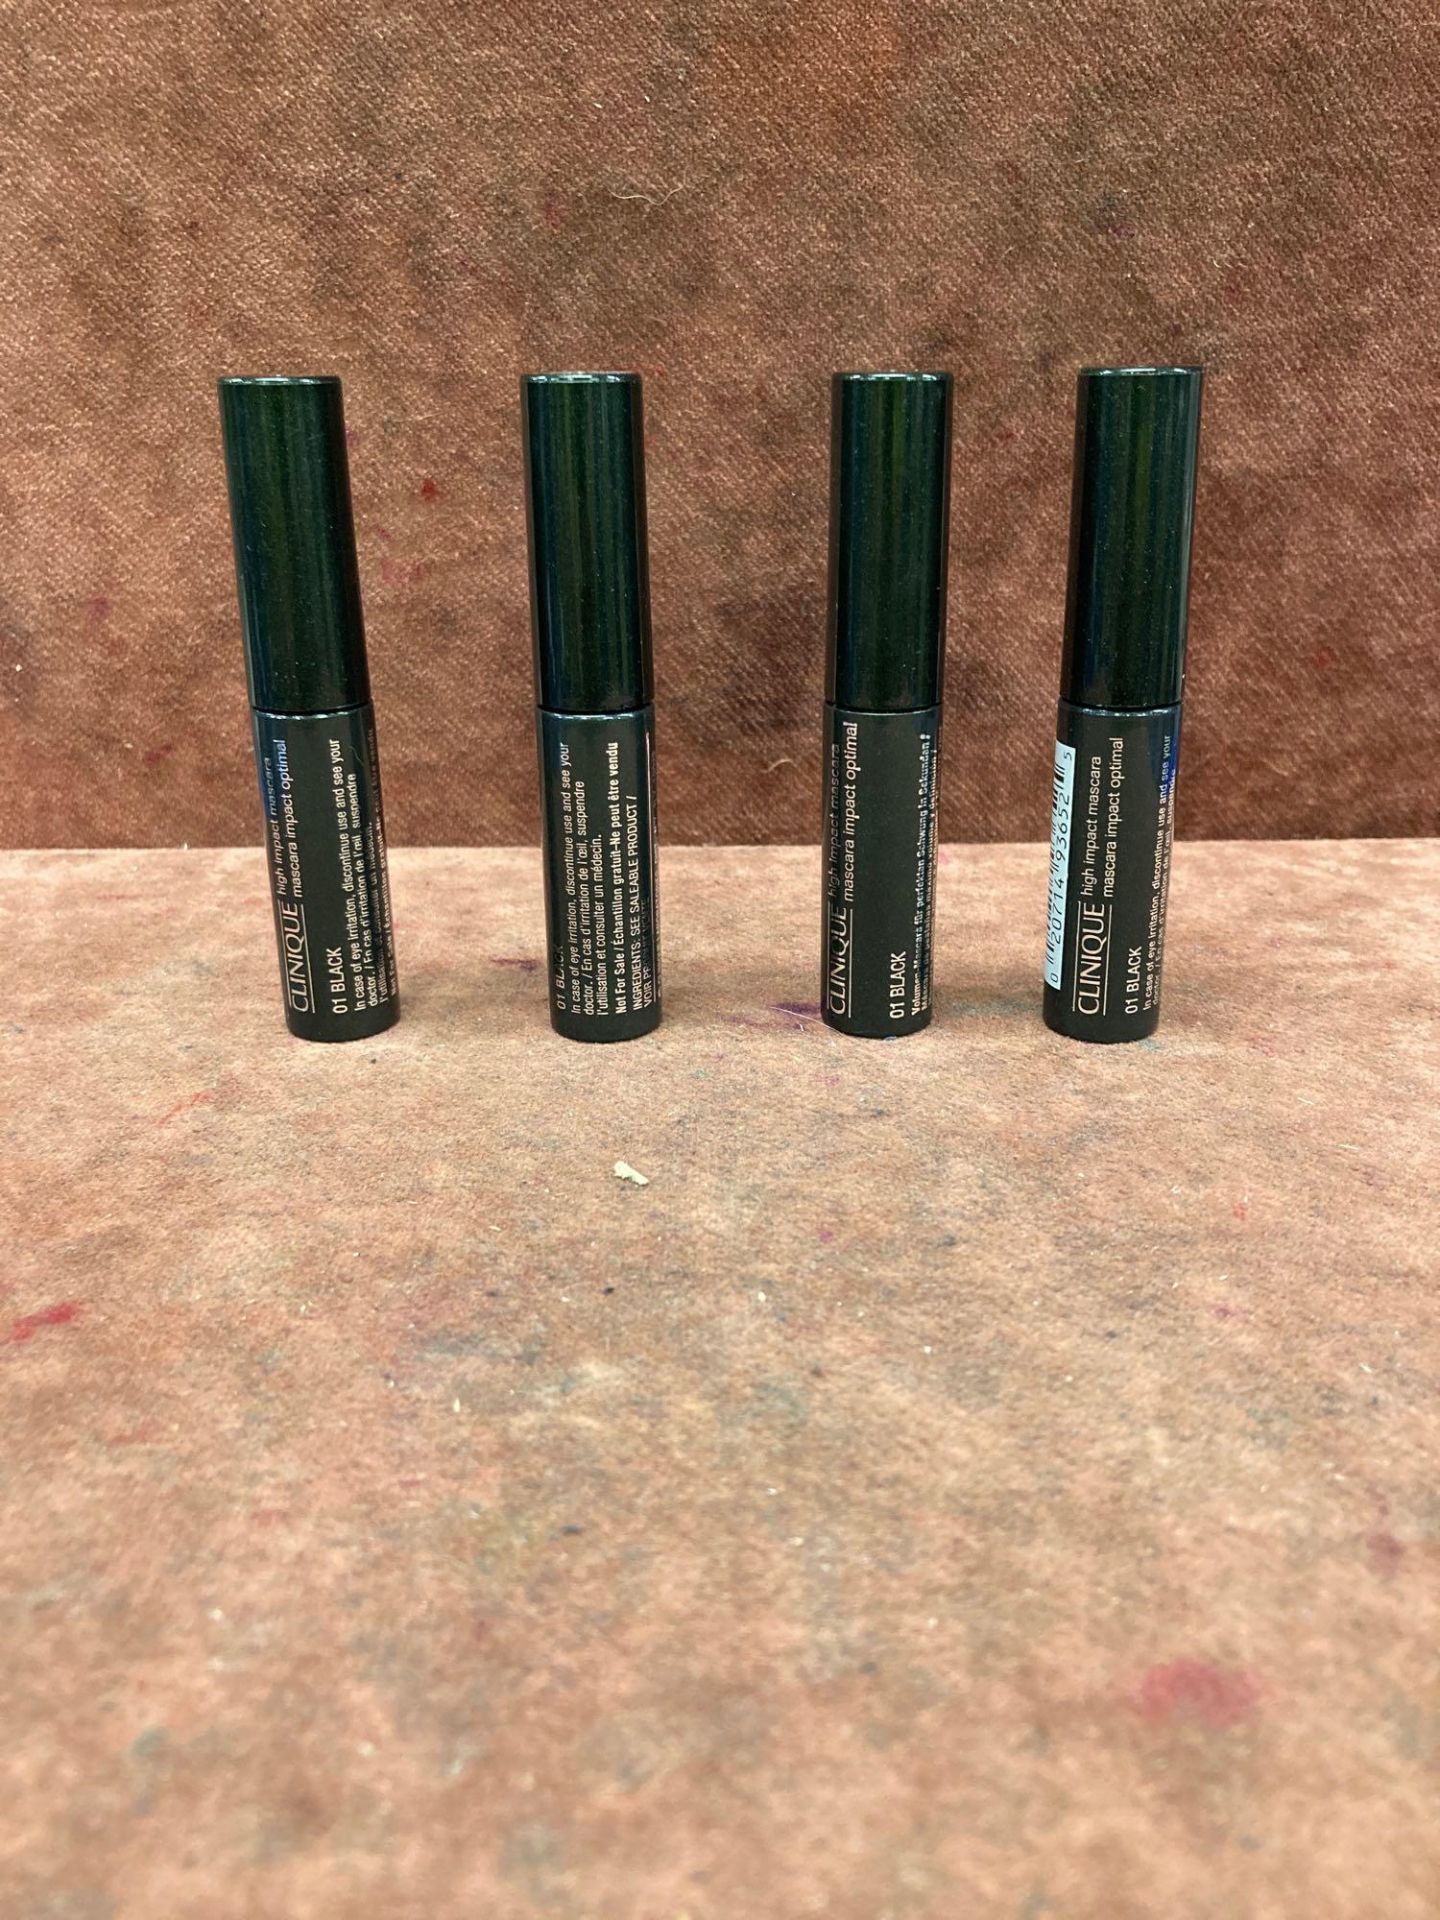 (Jb) RRP £200 Lot To Contain 10 Testers Of Clinique High Impact Mascaras All Ex-Display